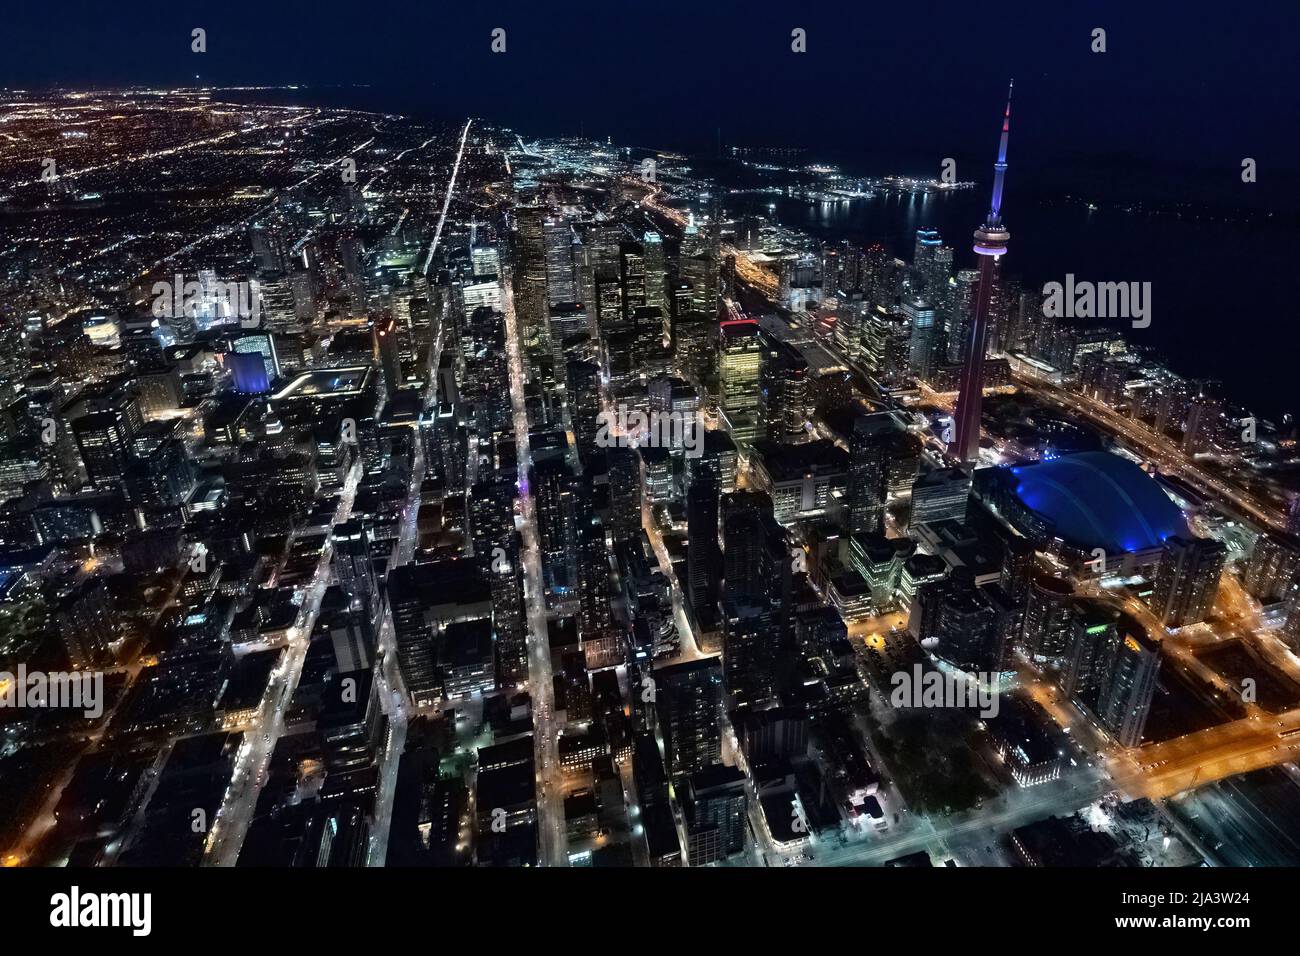 The West of Toronto at night Stock Photo